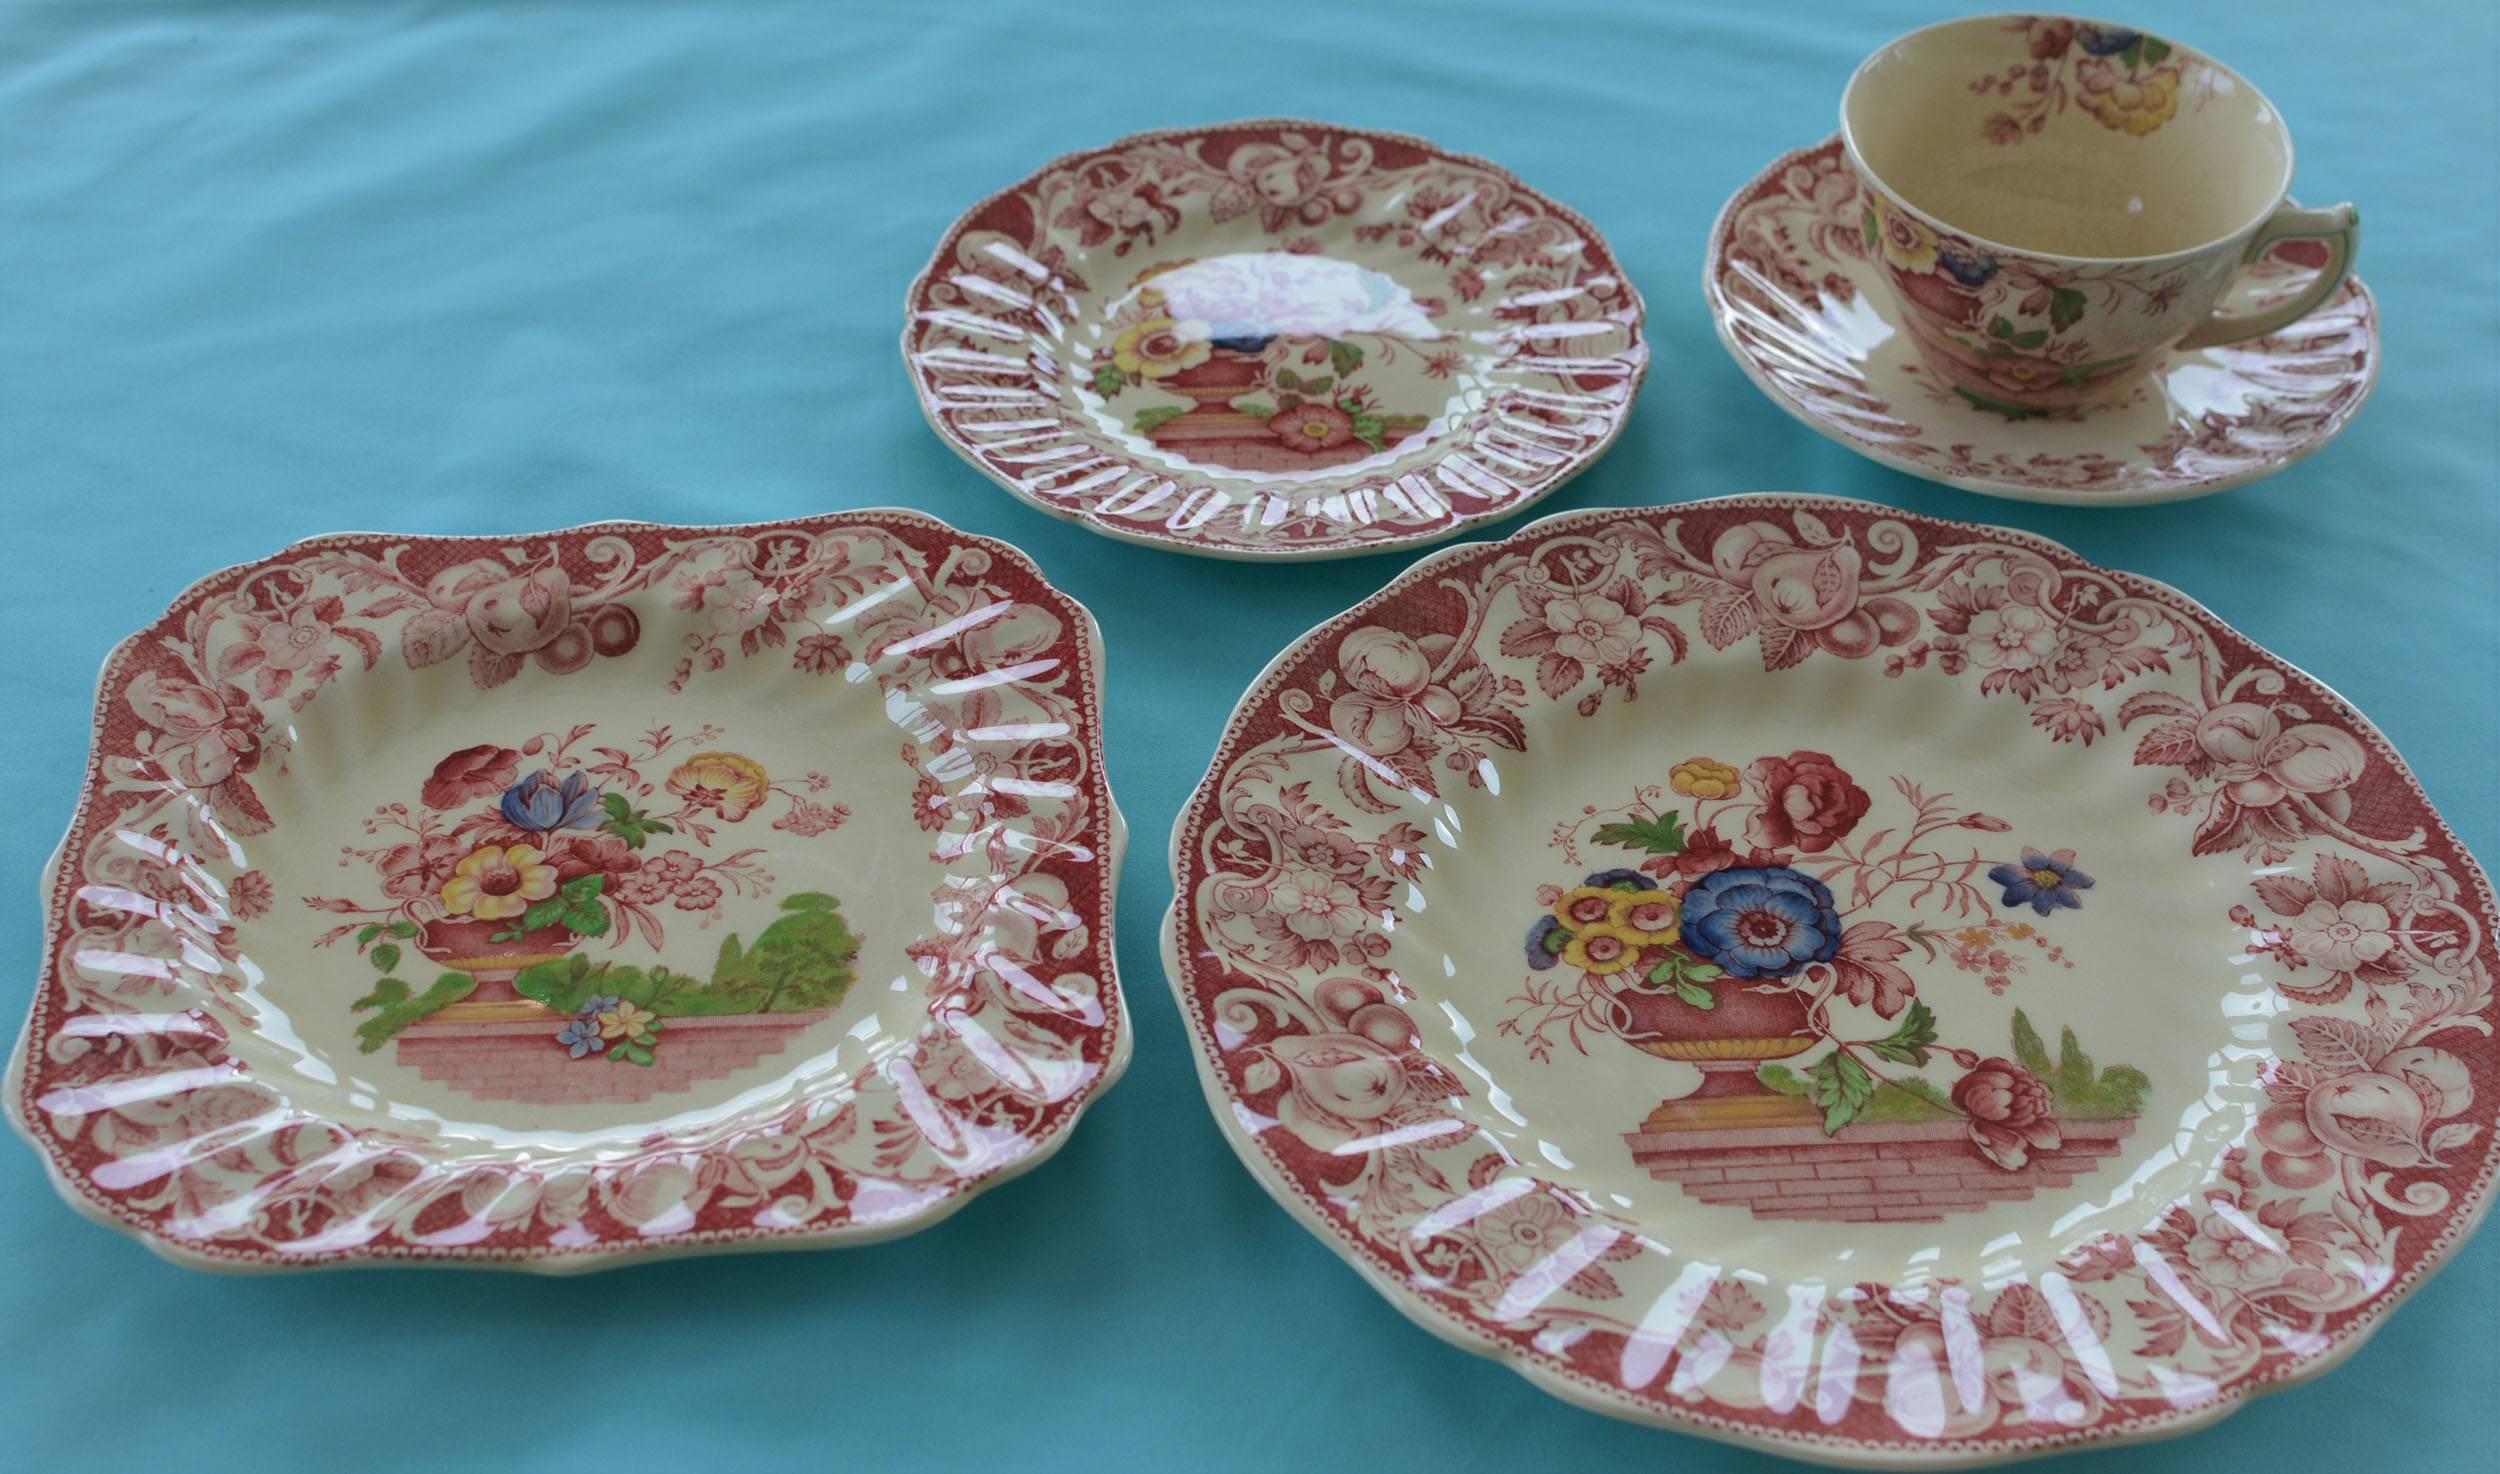 An amazing find! set of 60 pieces of Royal Doulton china in the Pomeroy red multi-color (centre design) pattern. Each piece is stamped and signed. The artwork on this set is so fine. 

Produced from the original Davenport engravings (1793). This